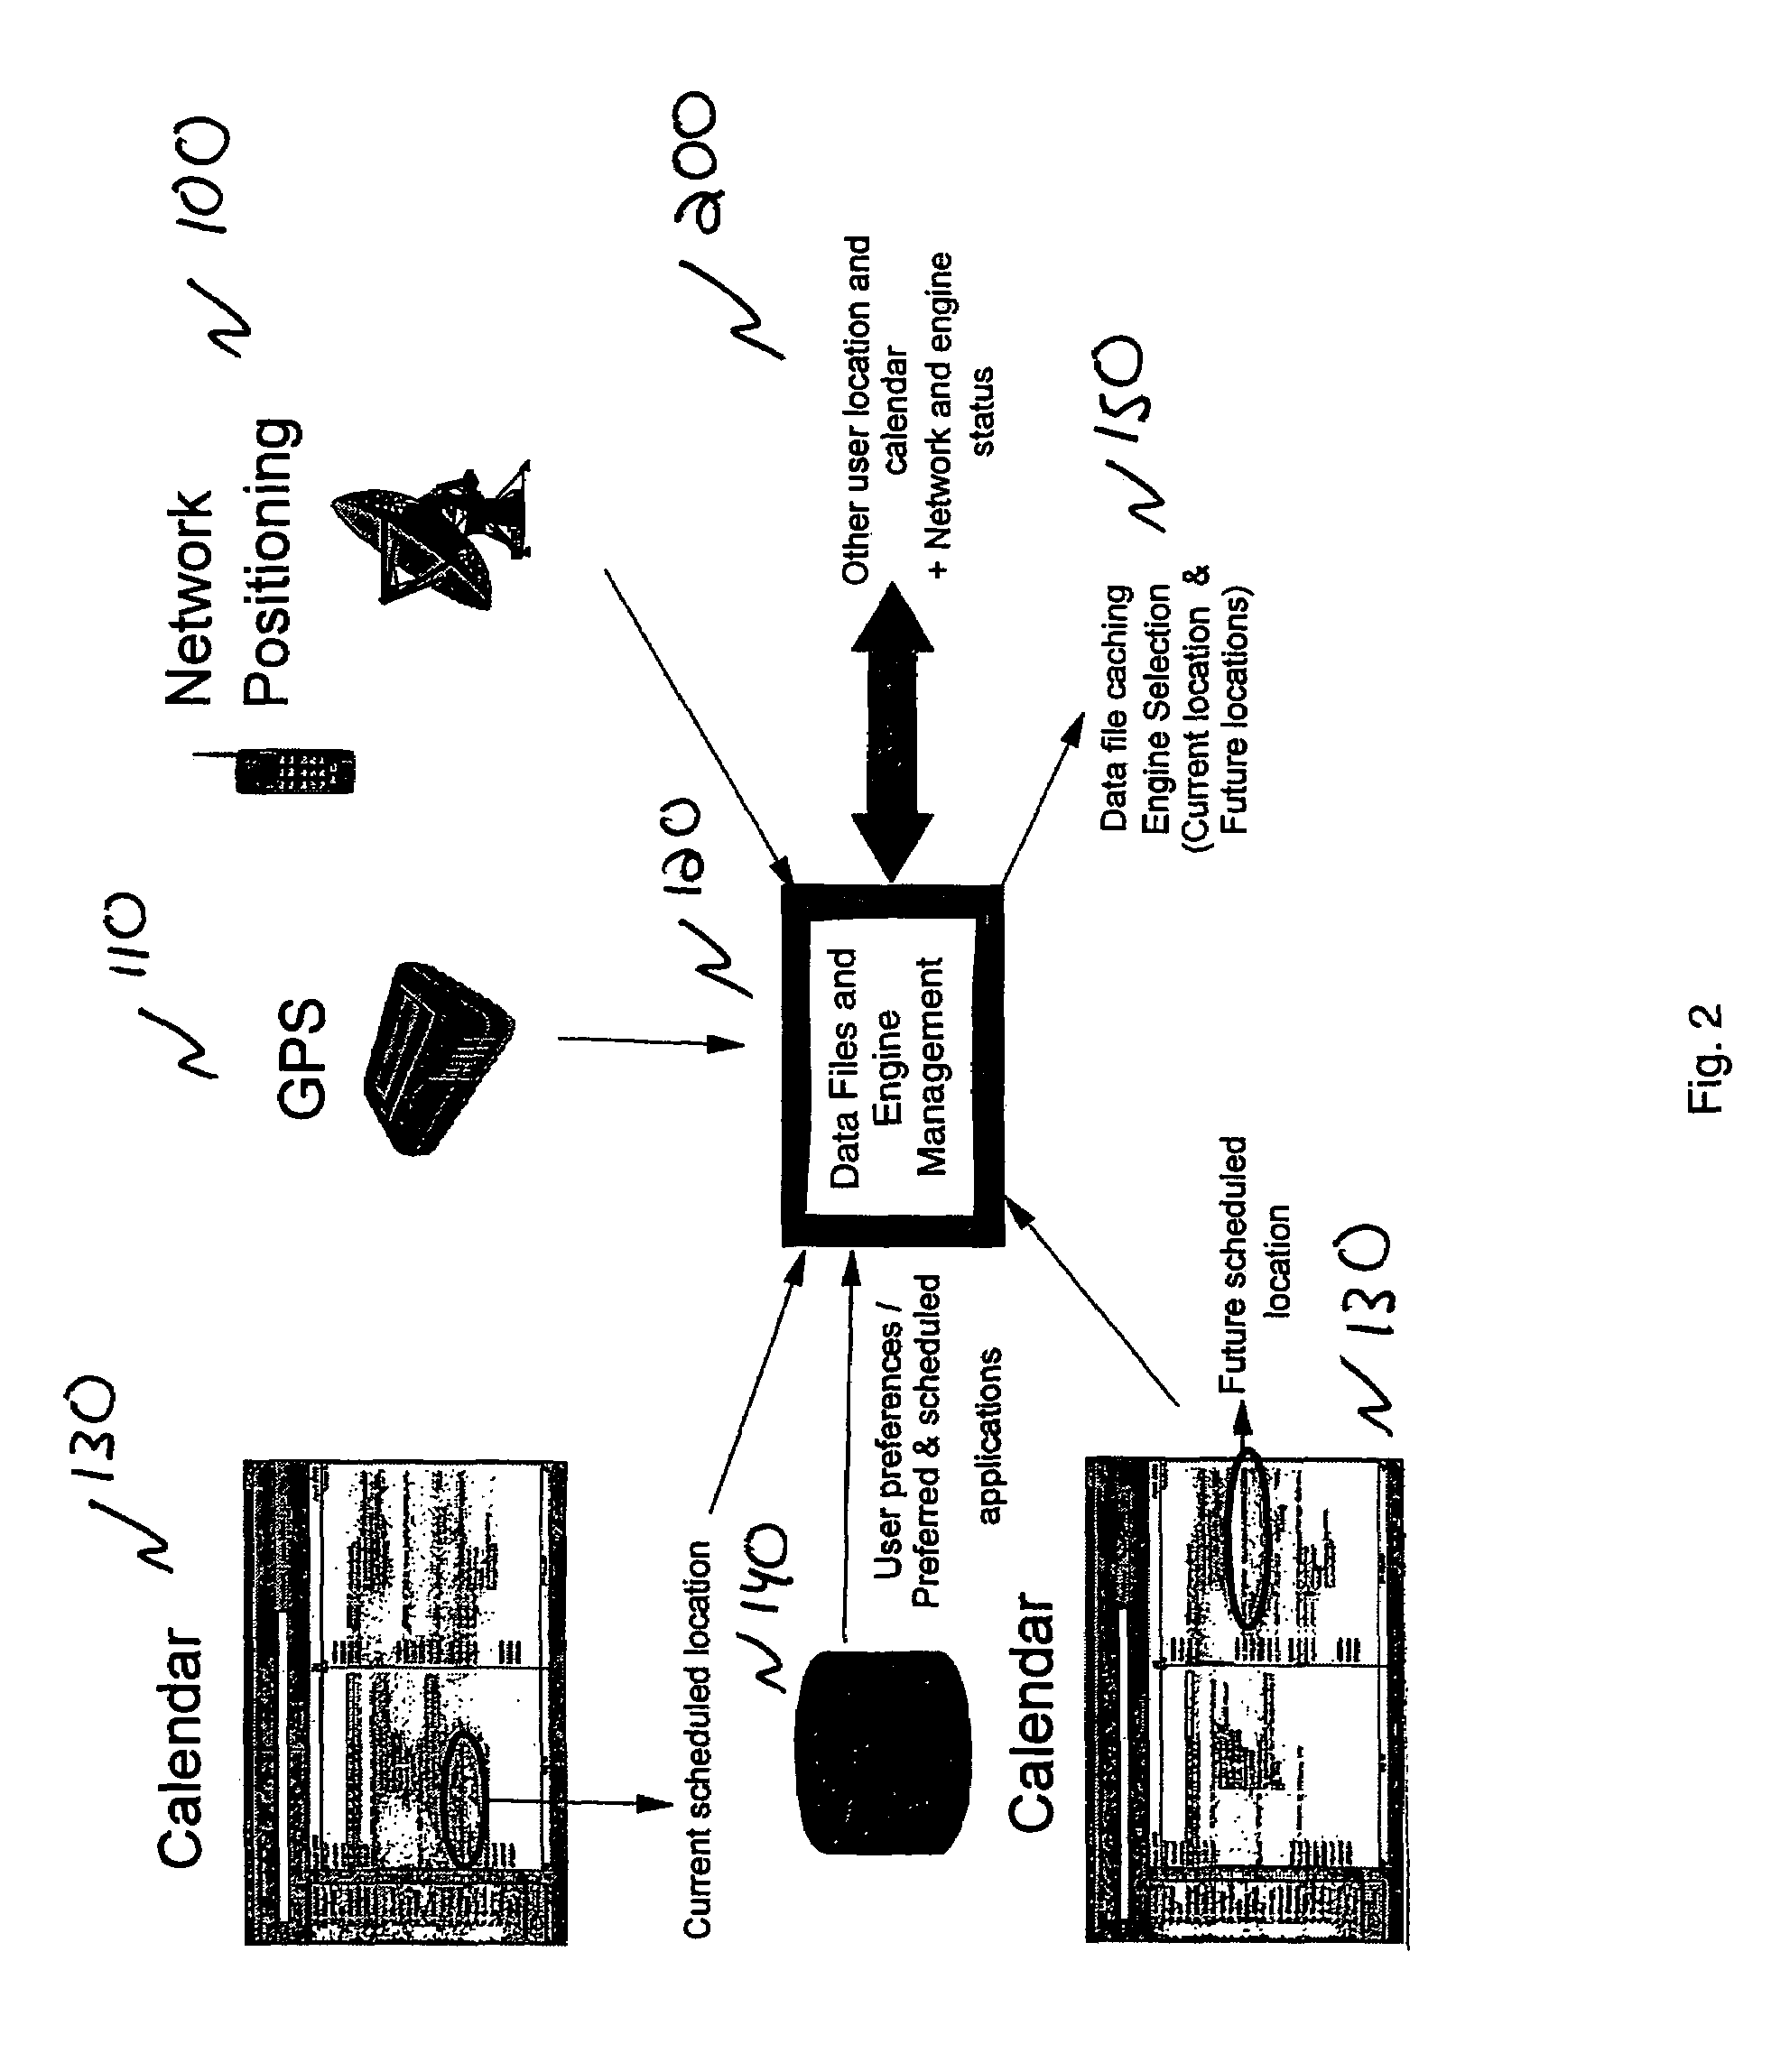 Resource configuration in multi-modal distributed computing systems